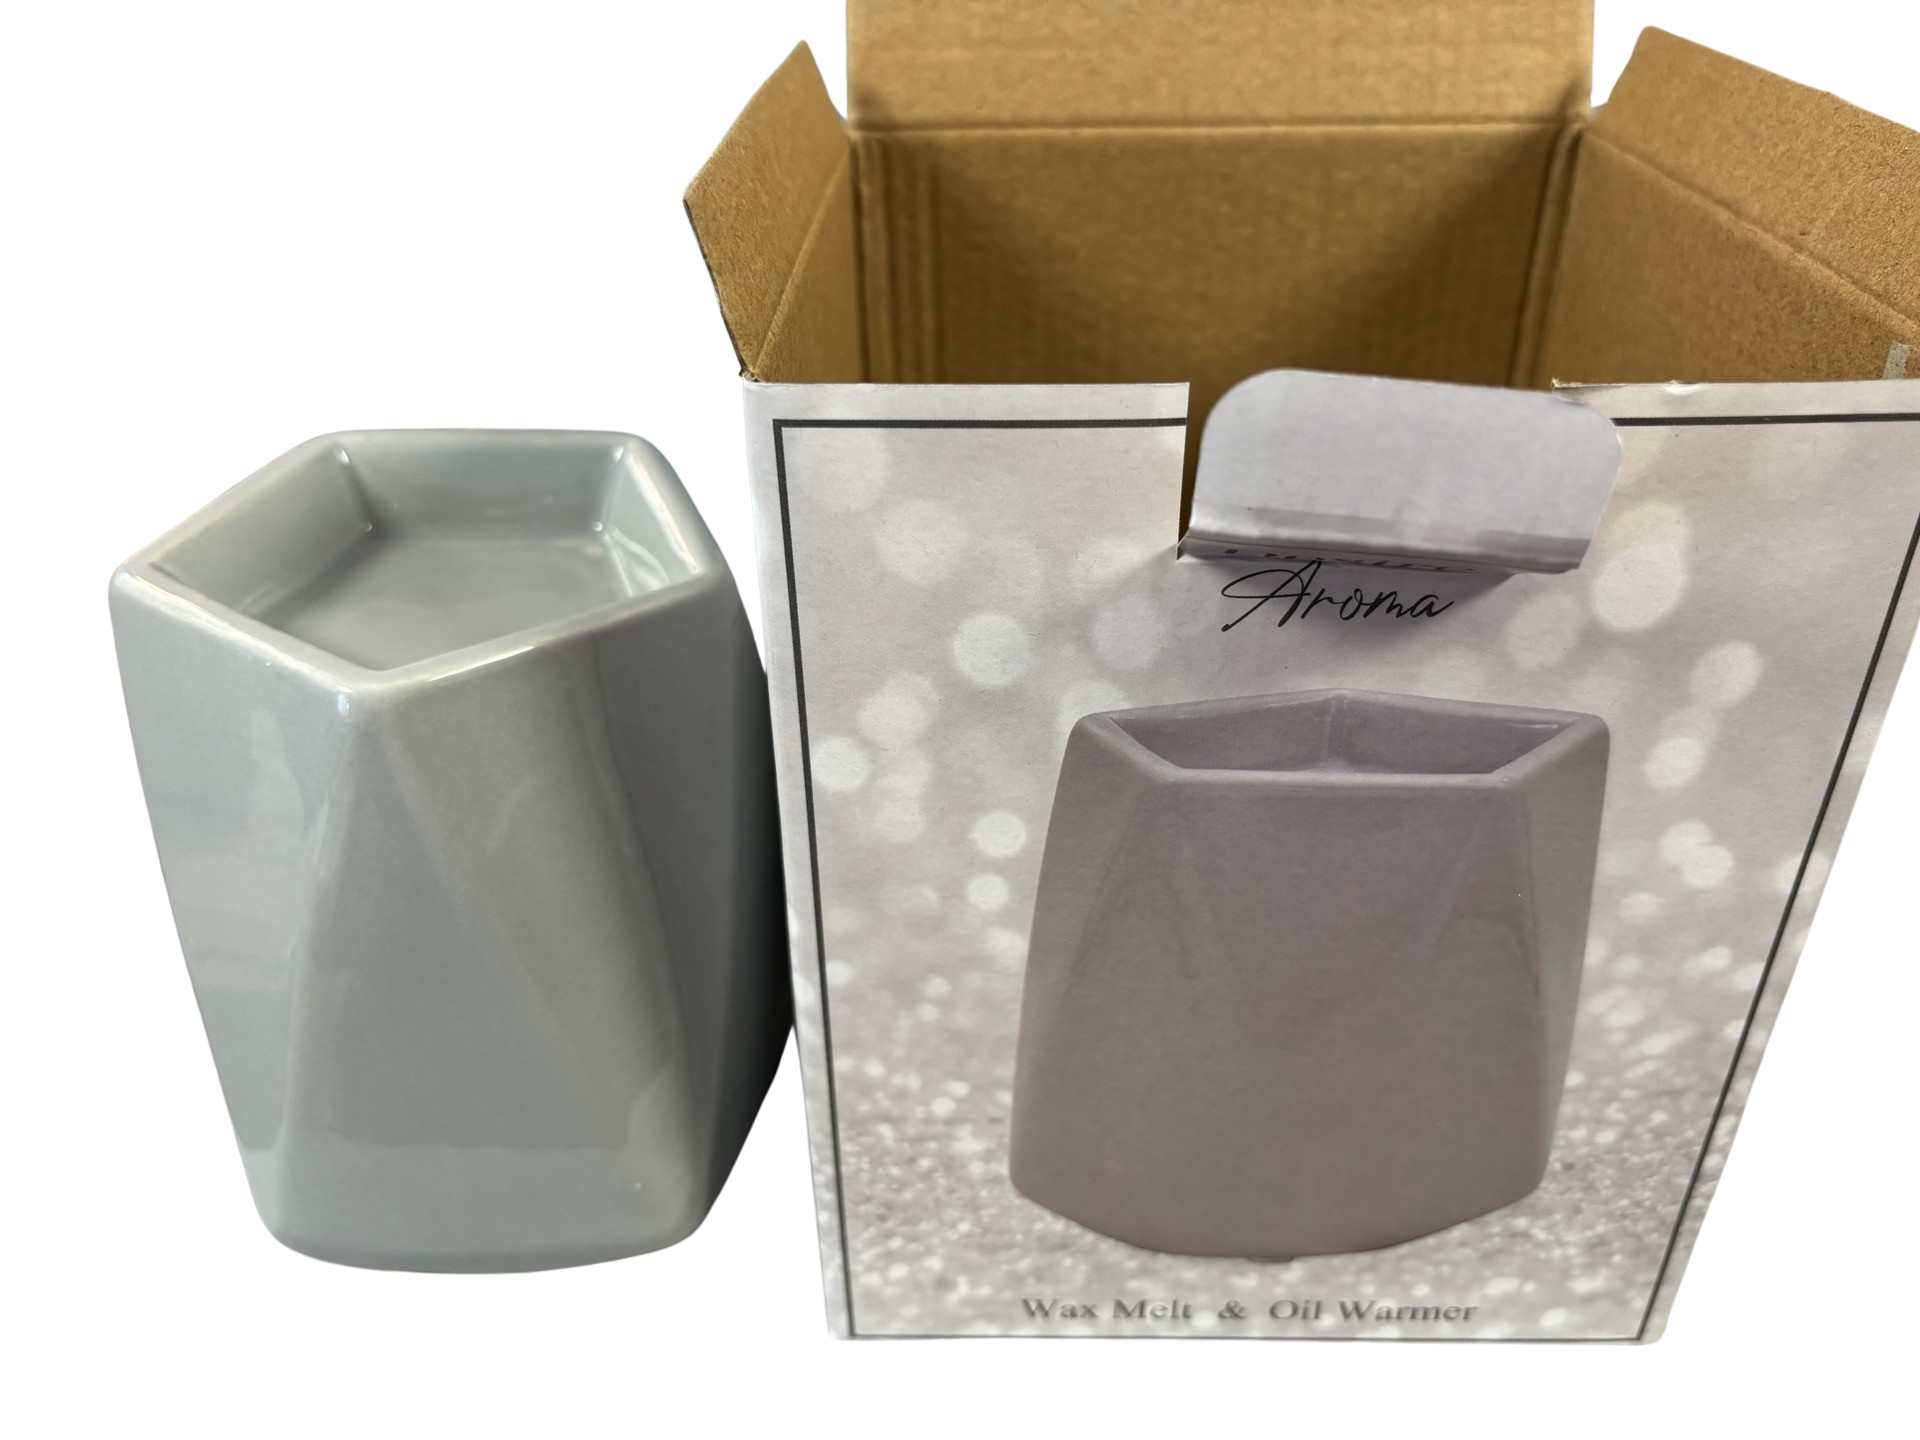 Grey Gloss Wax Melt & Oil Warmer by The Soap Gal x next to its packaging box displaying an image of the product, enhancing your home fragrance experience.